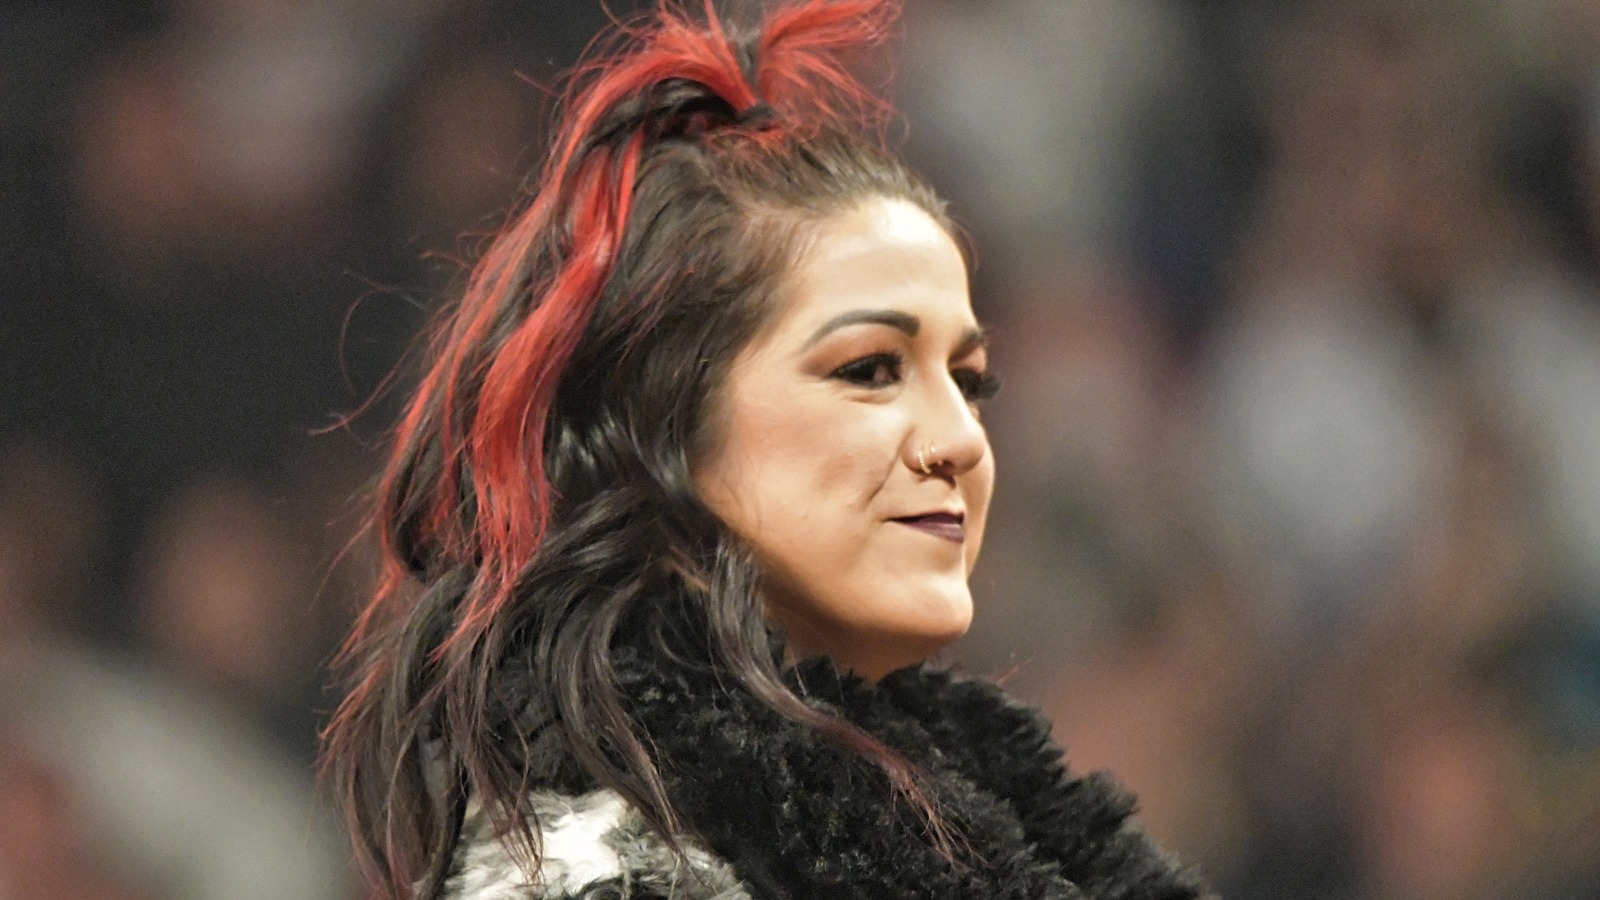 Bayley campaigned for this group to perform at WWE WrestleMania 40